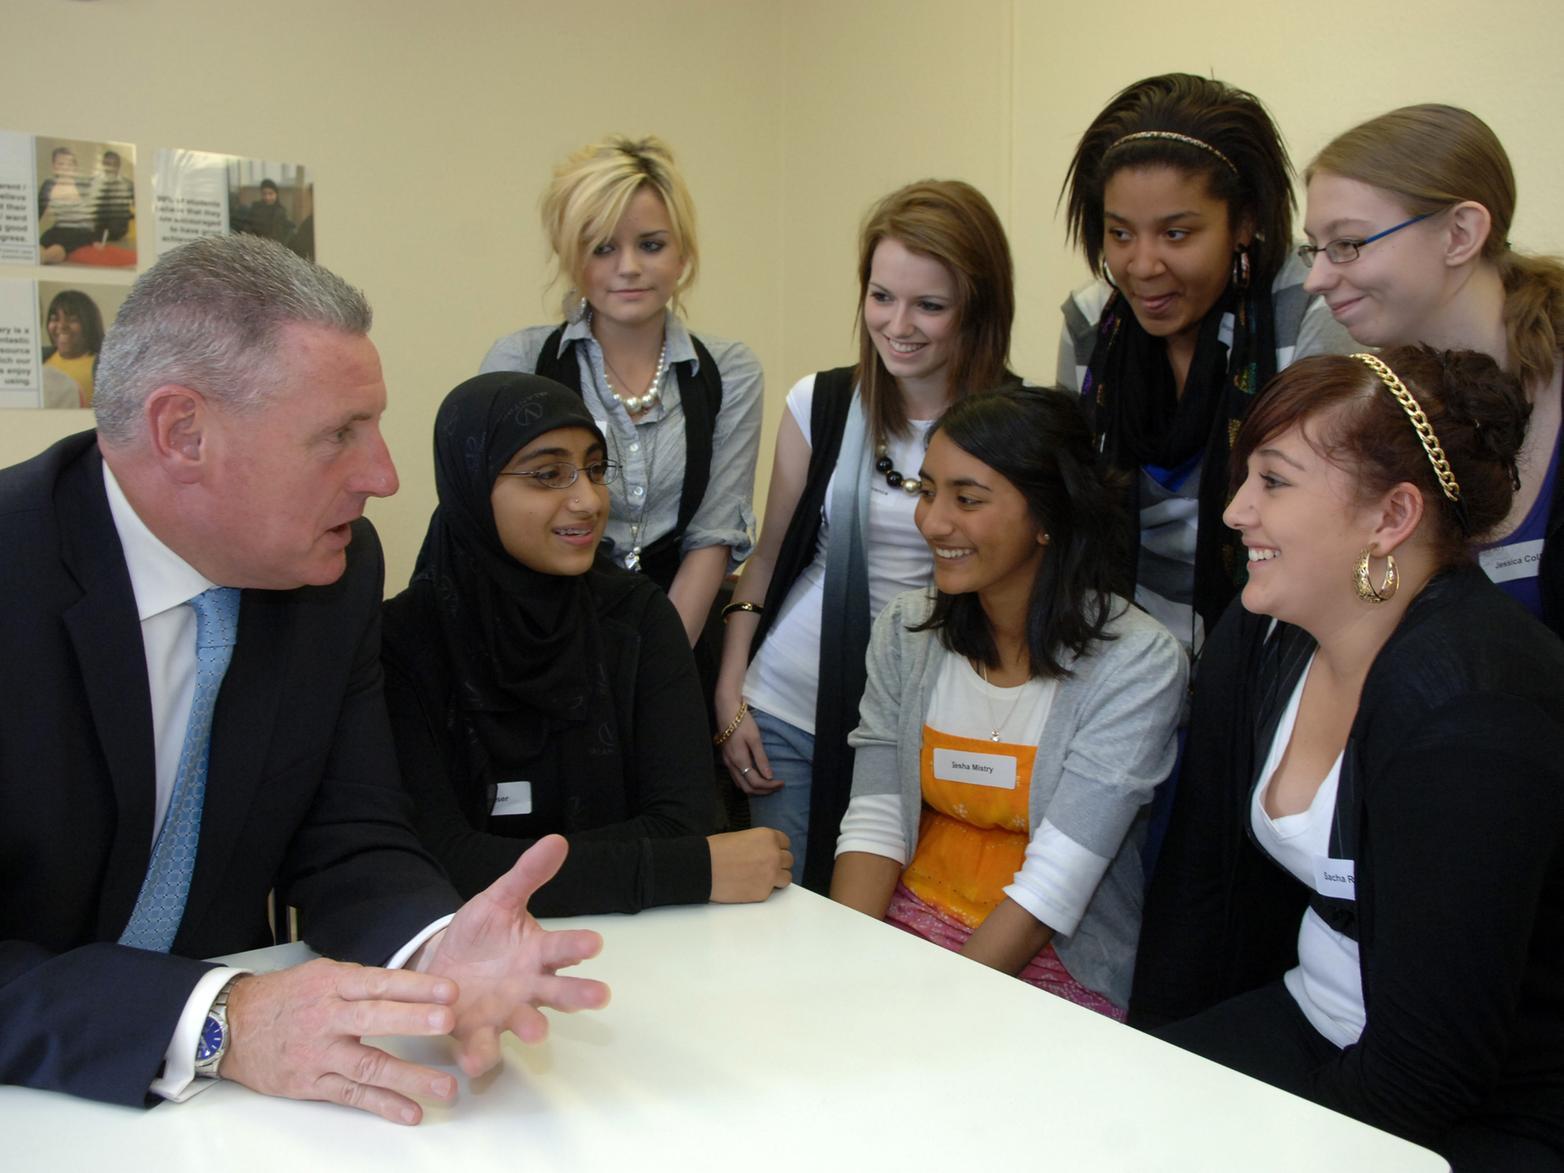 Schools Minister Vernon Coaker with pupils, back from left, Rachel Peacock, Rebecca Lawrence, Stephanie Firth, Jessica Collins, front, Arfana Kauser, Iesha Mistry and Sacha Robinson.